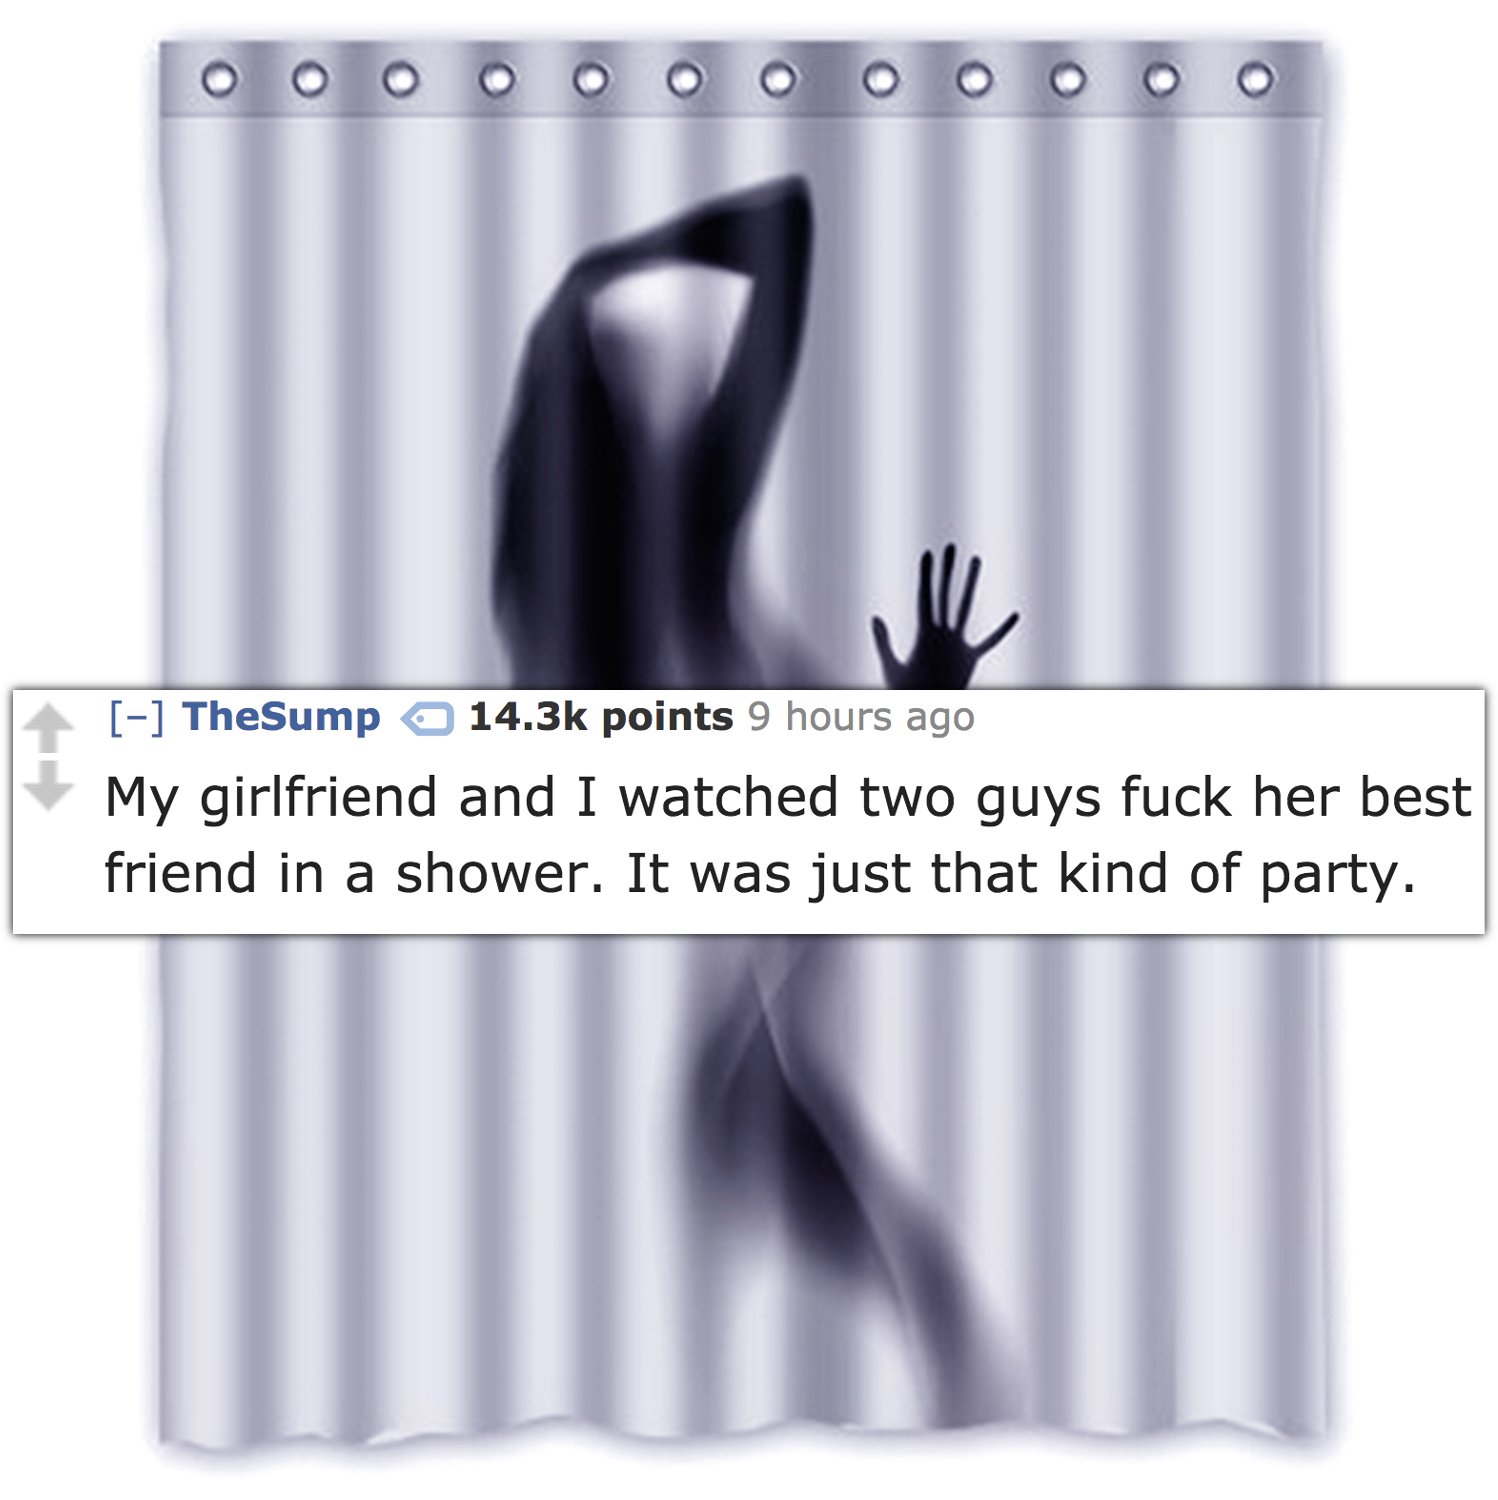 nicki minaj shower curtains - TheSump points 9 hours ago My girlfriend and I watched two guys fuck her best friend in a shower. It was just that kind of party.